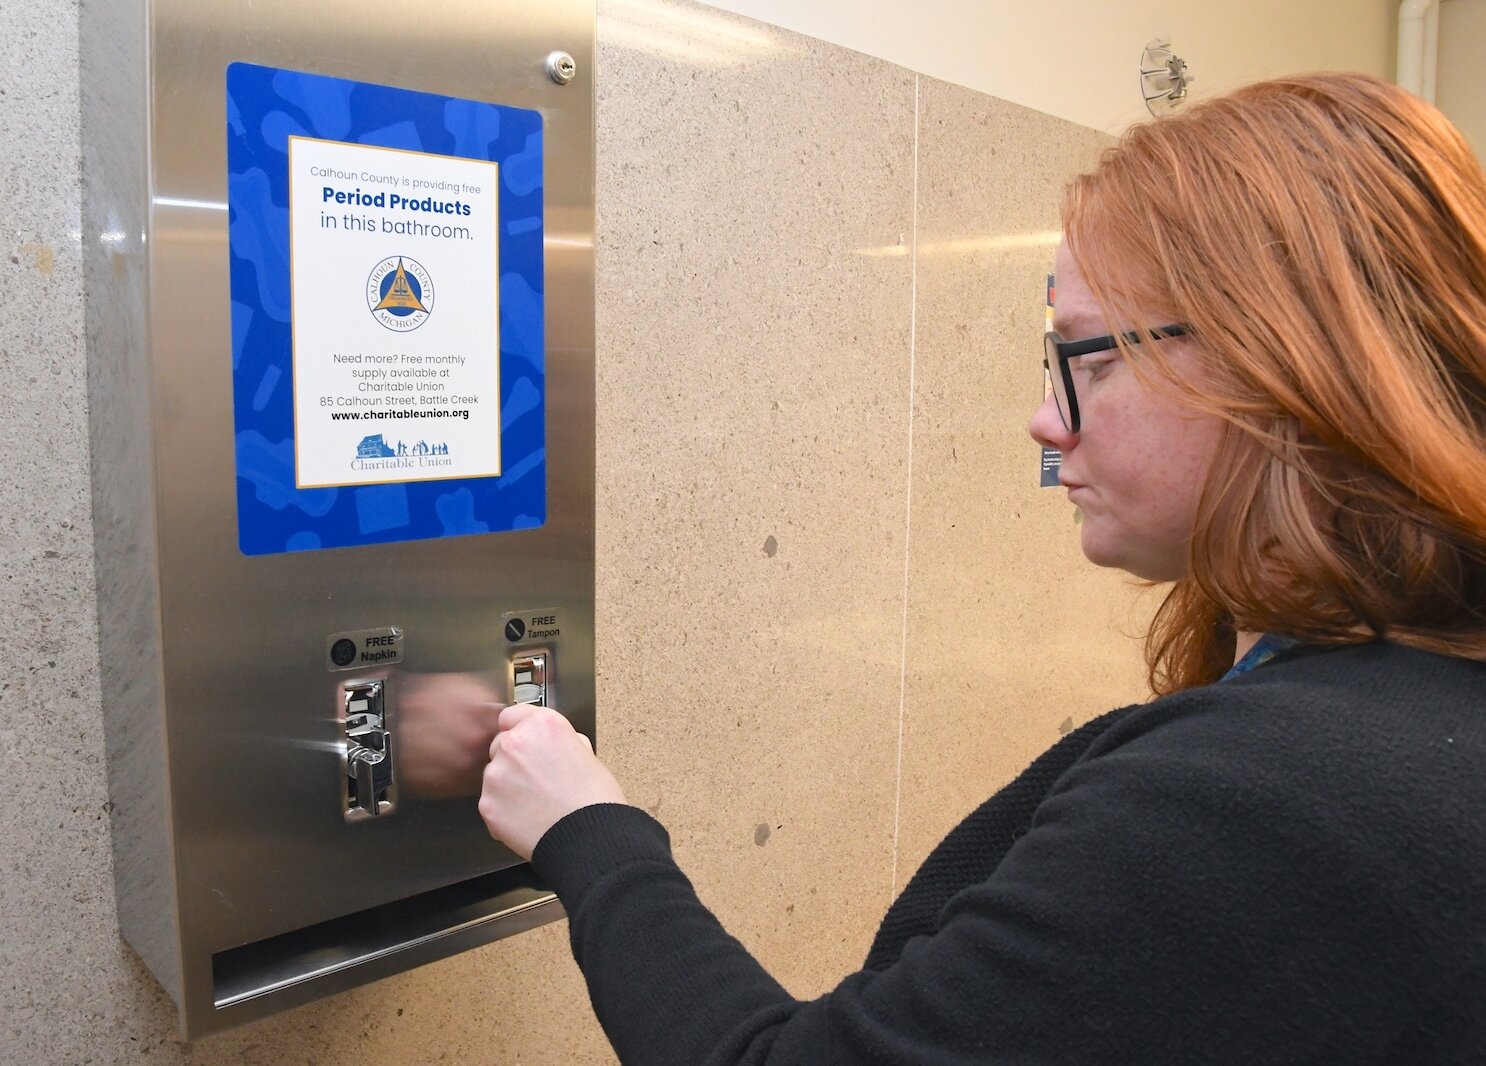 Lucy Blair, Communications Director for Calhoun County, shows how feminine hygiene products dispenser works in a women’s restroom at the Calhoun County building in Marshall.